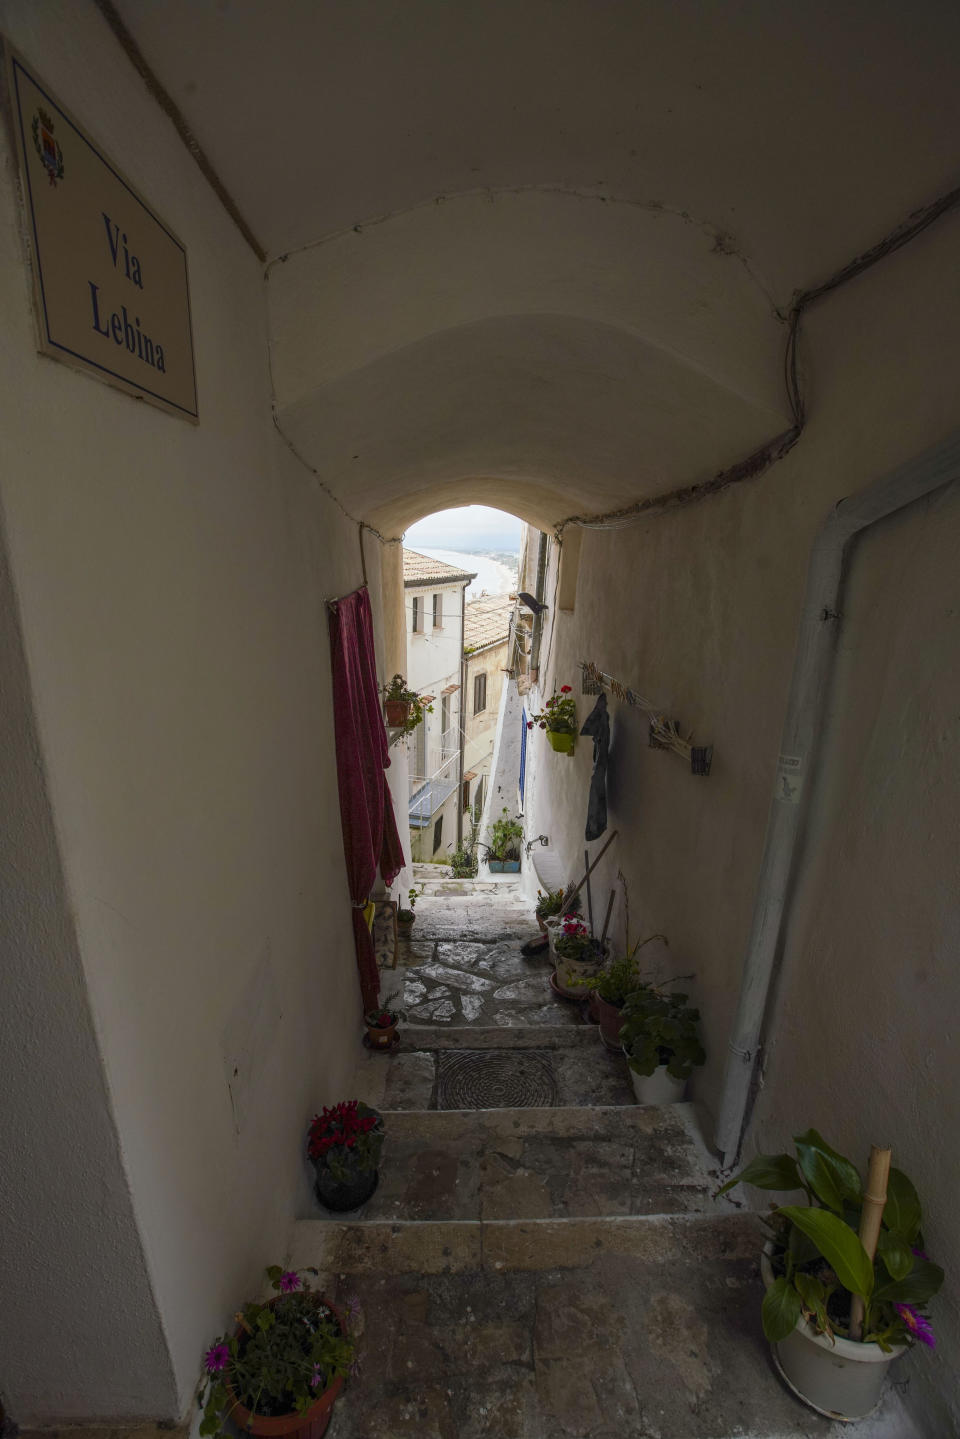 This picture taken on Tuesday, April 28, 2020 shows a narrow alley in the seaside town of Sperlonga, some 120km (80 miles) south of Rome. Normally, at this time of year Sperlonga would already be bustling with its first clients of the season. The restaurants would be fully operational and the golden-sand beaches, although still too chilly for Italians, would have been enjoyed by northern Europeans eager for some sunlight after a long, dark winter. (AP Photo/Andrew Medichini)